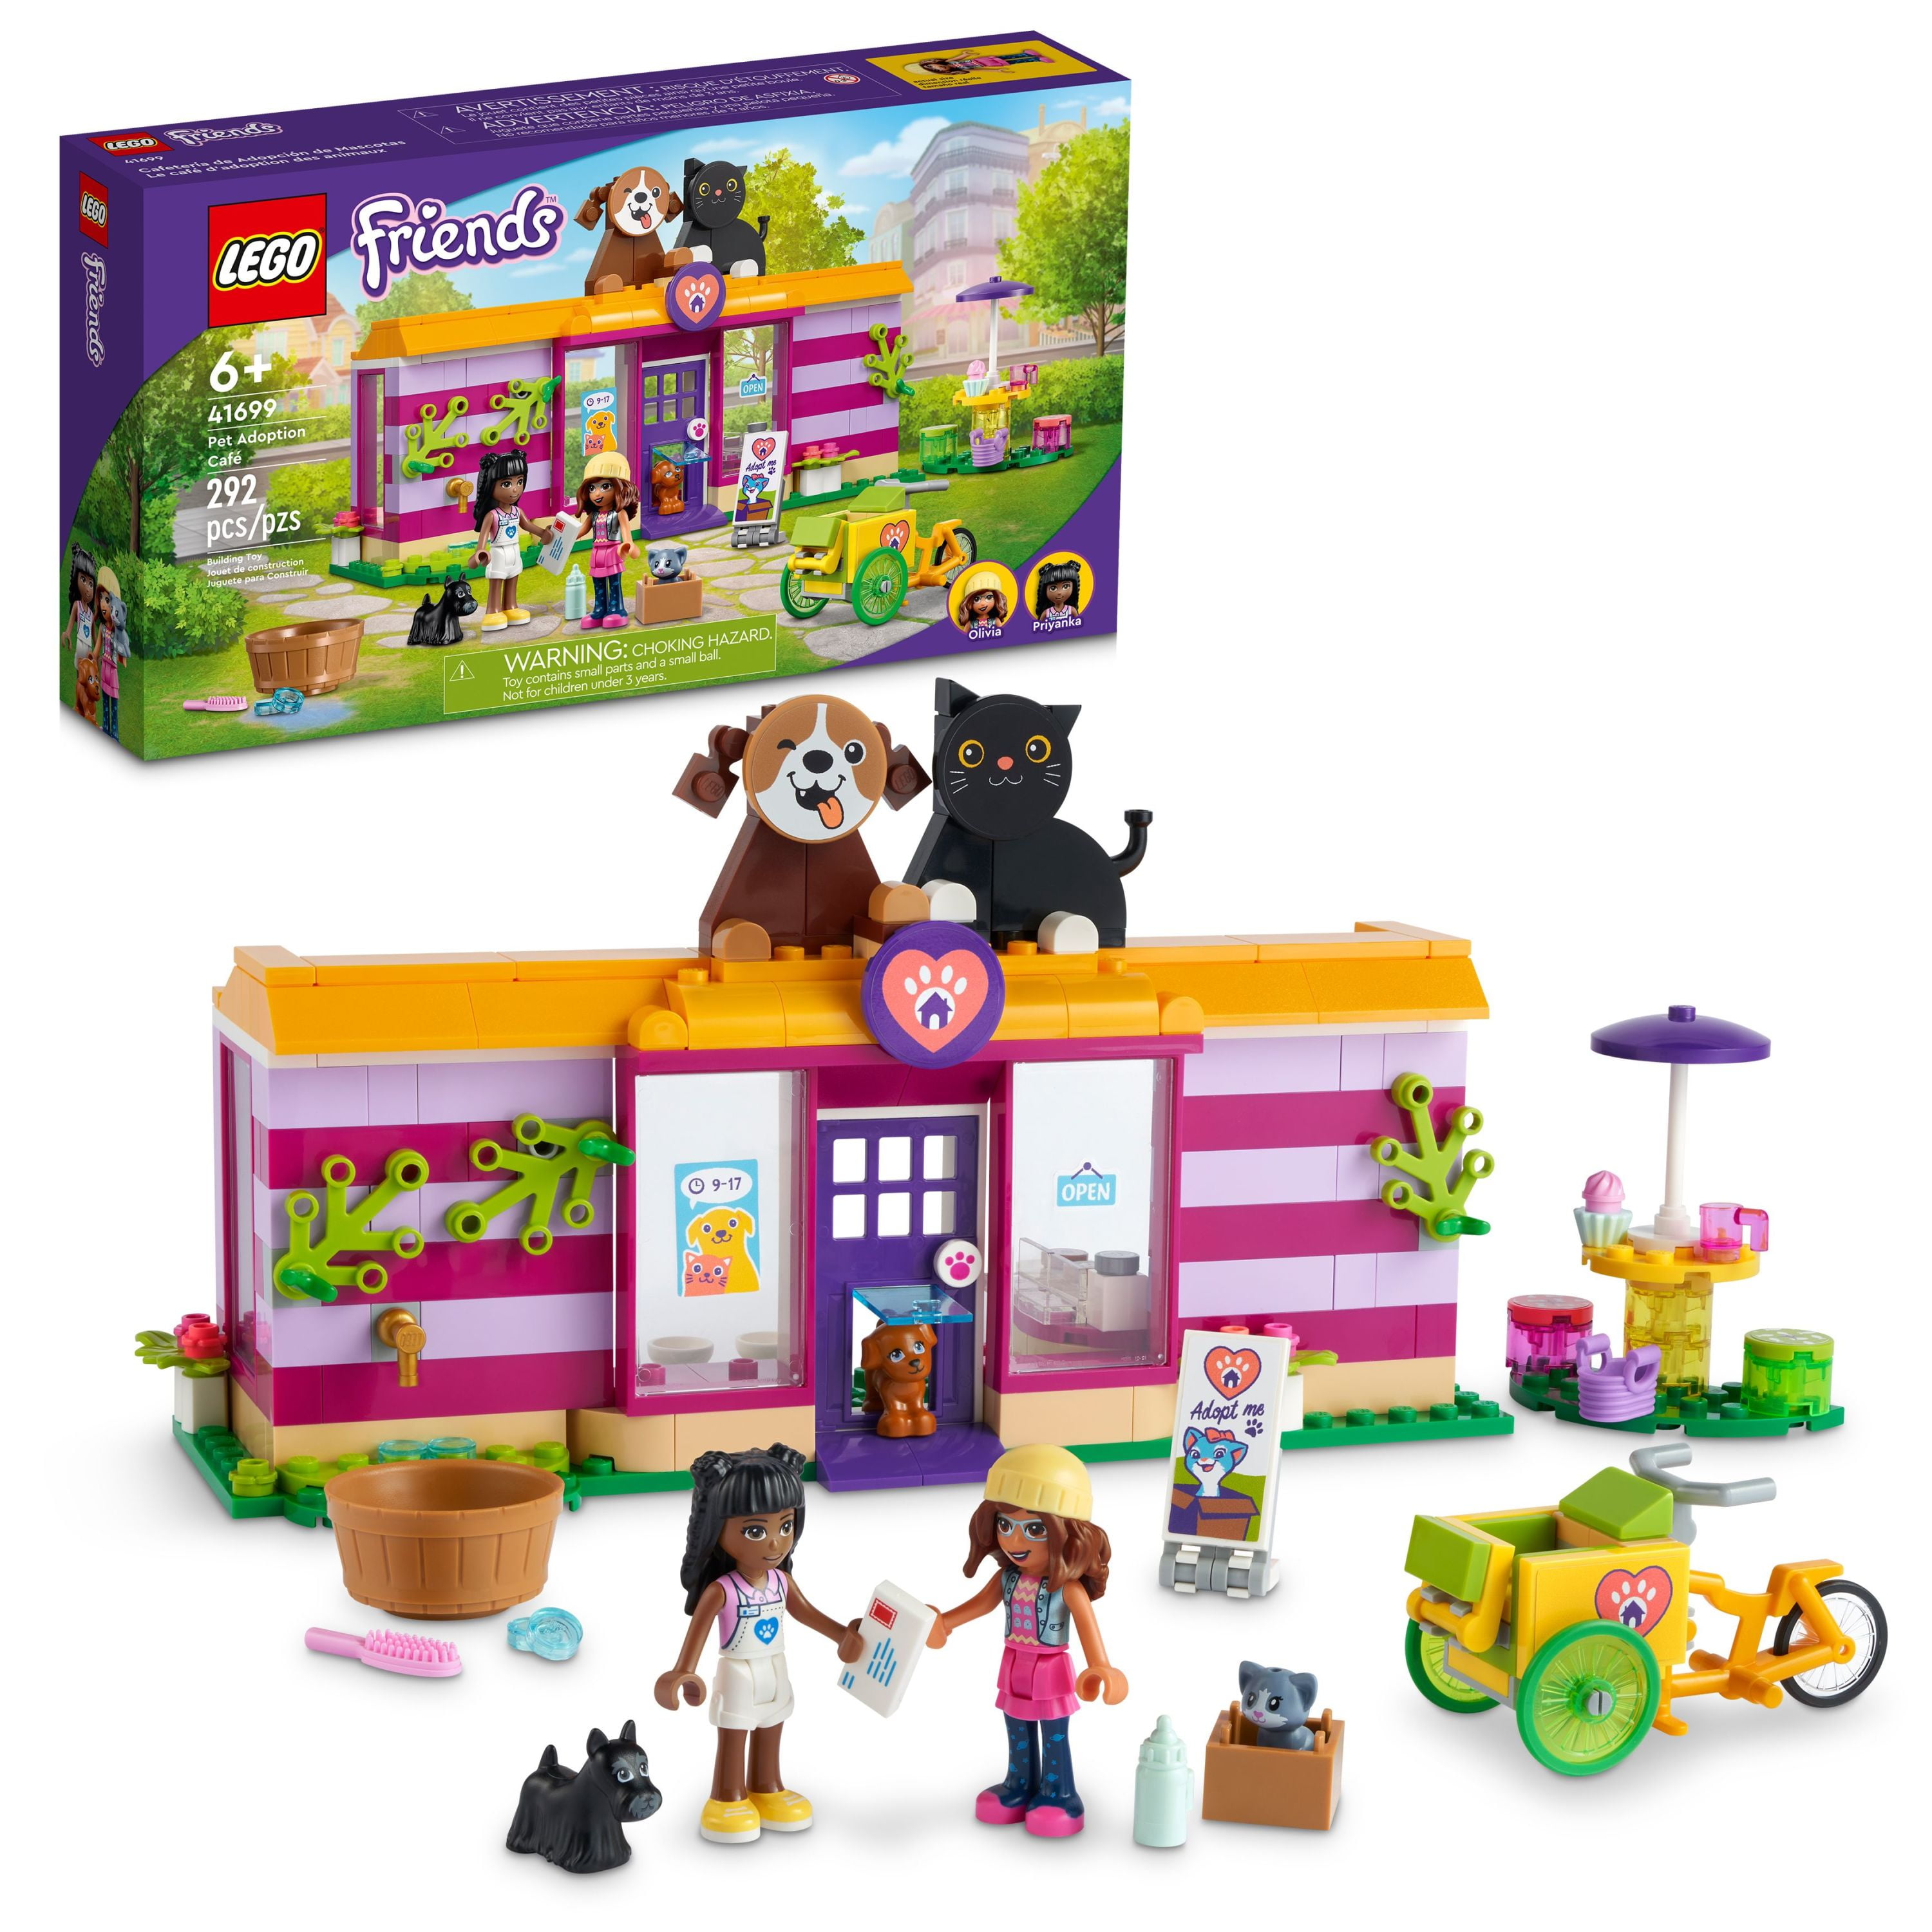 LEGO Friends Pet Adoption Café 41699 Building Toy - Collectible Animal Rescue Set with Olivia & Mini-Dolls, Cat & Dog Figures, Creative Toys for Boys, Girls, and Kids Ages 6+ - Walmart.com